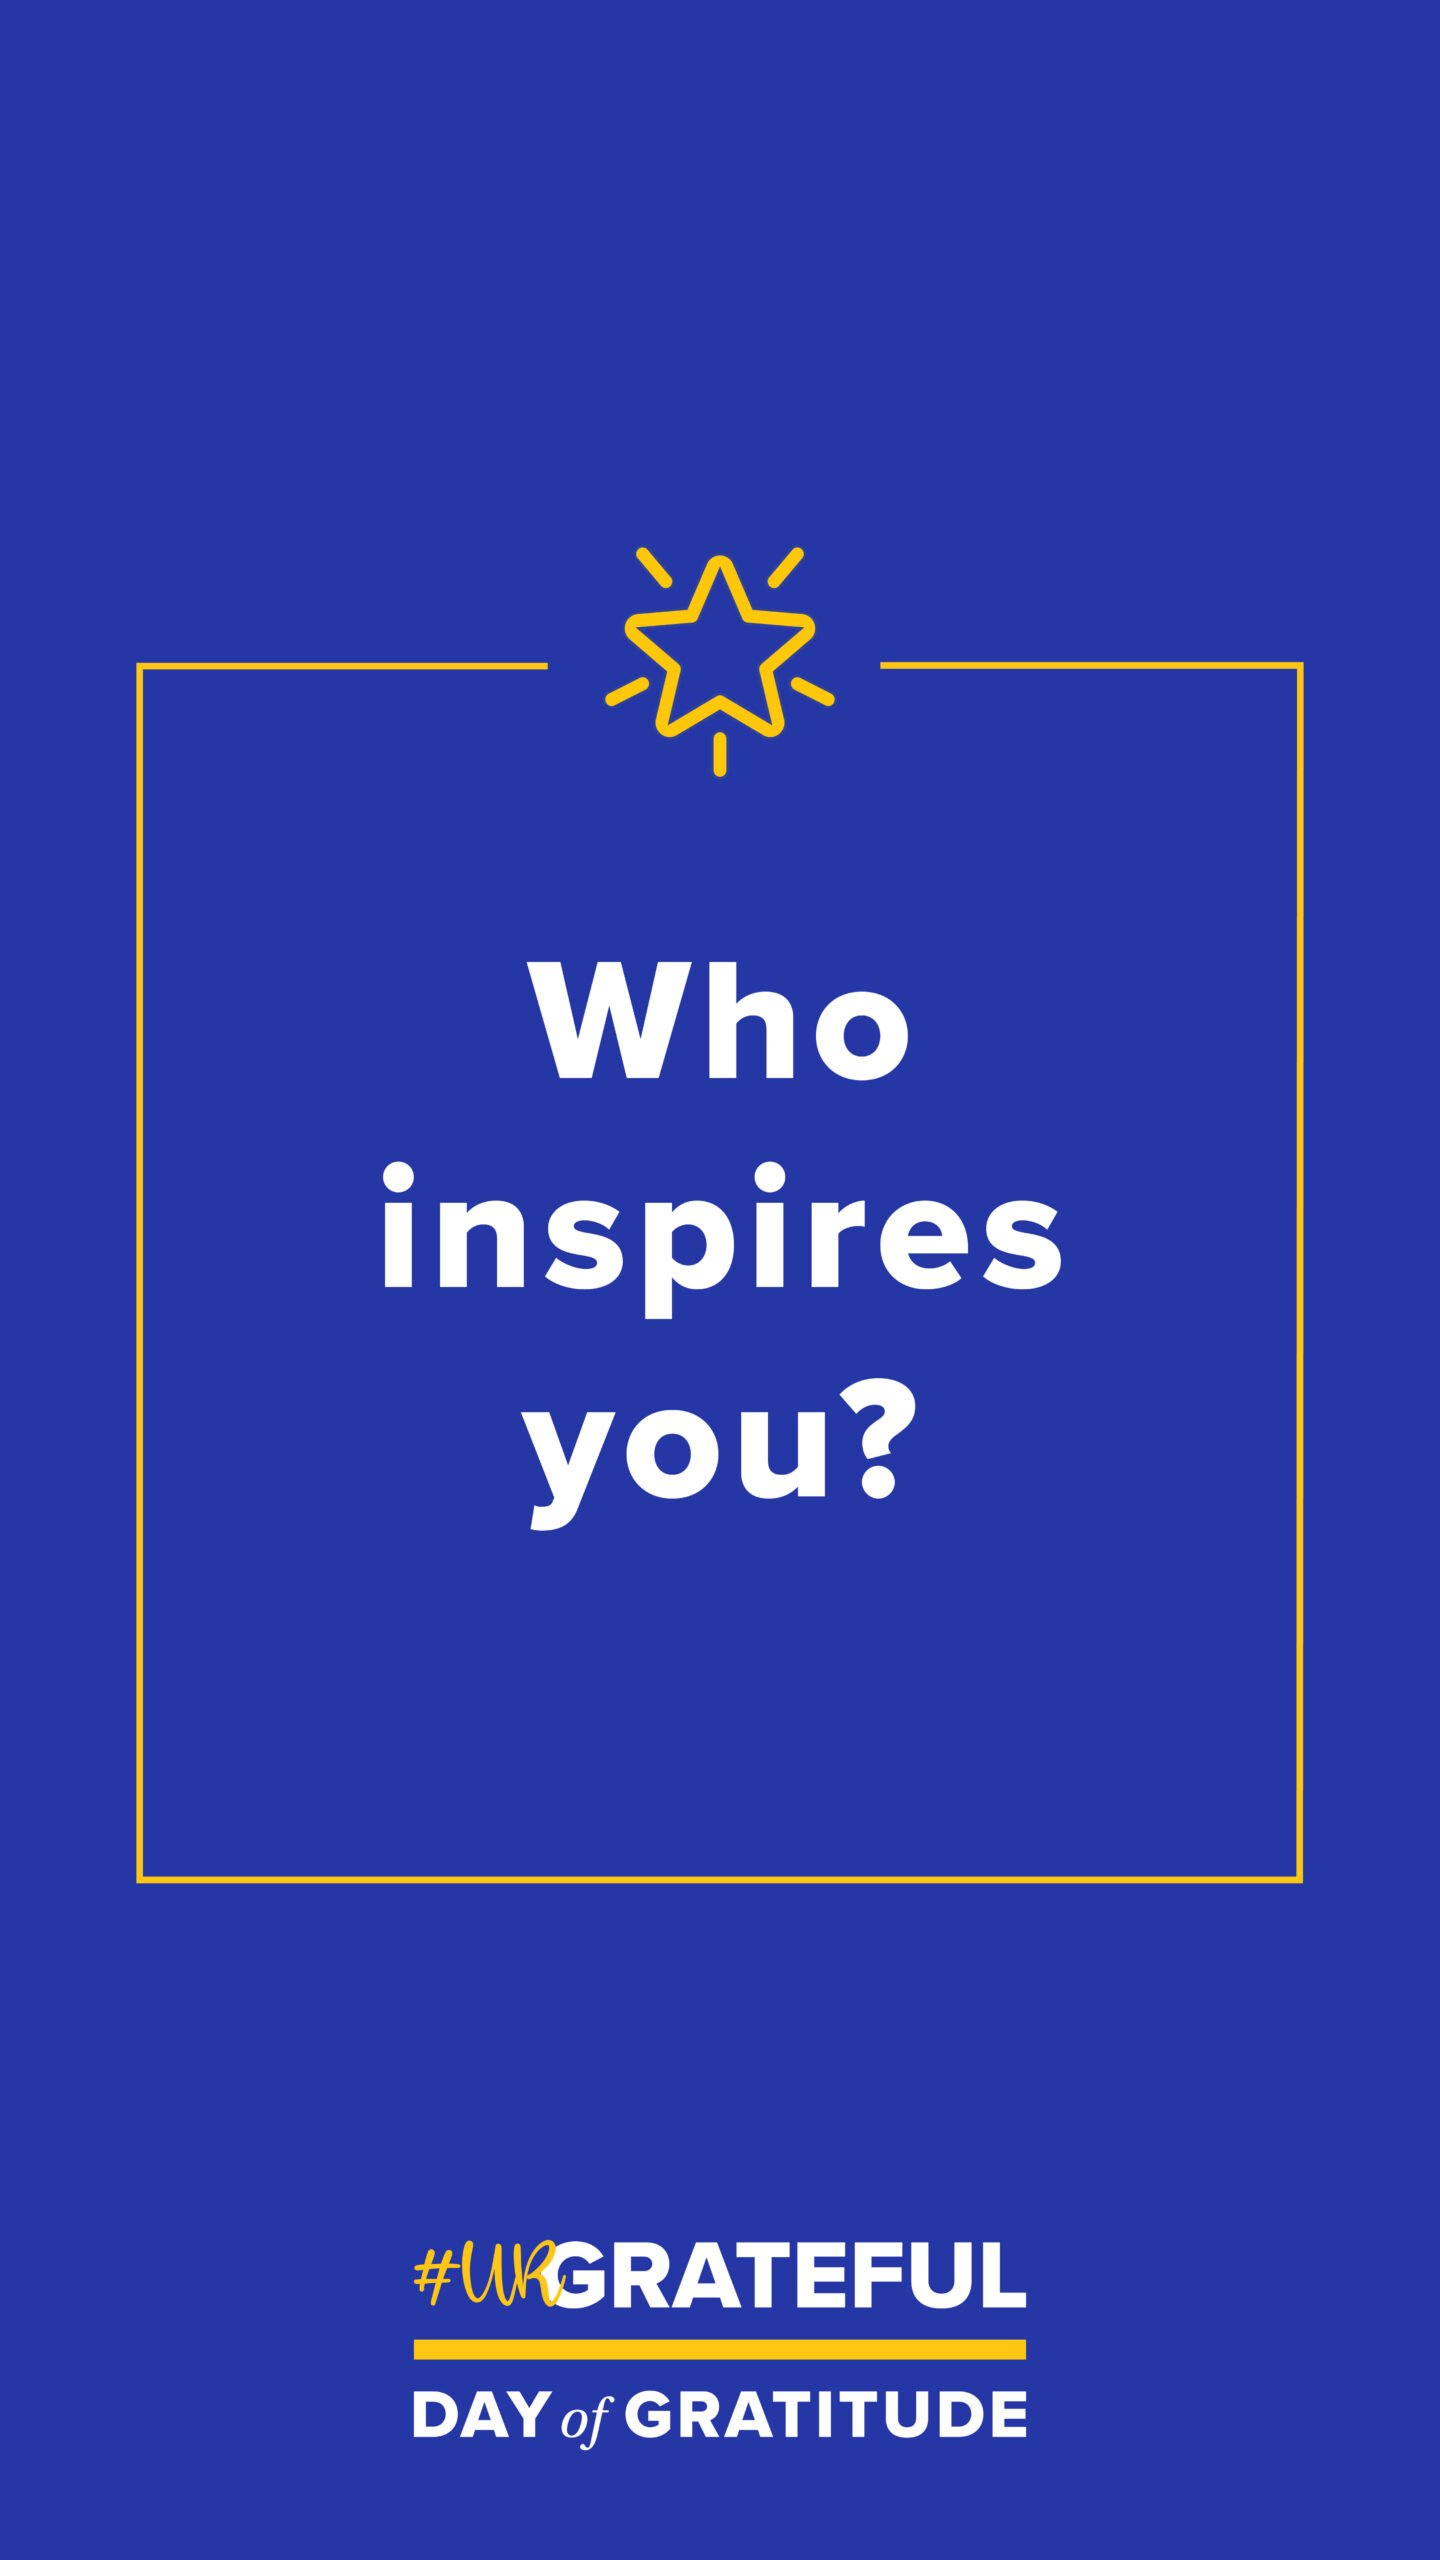 Who inspires you? on blue background graphic